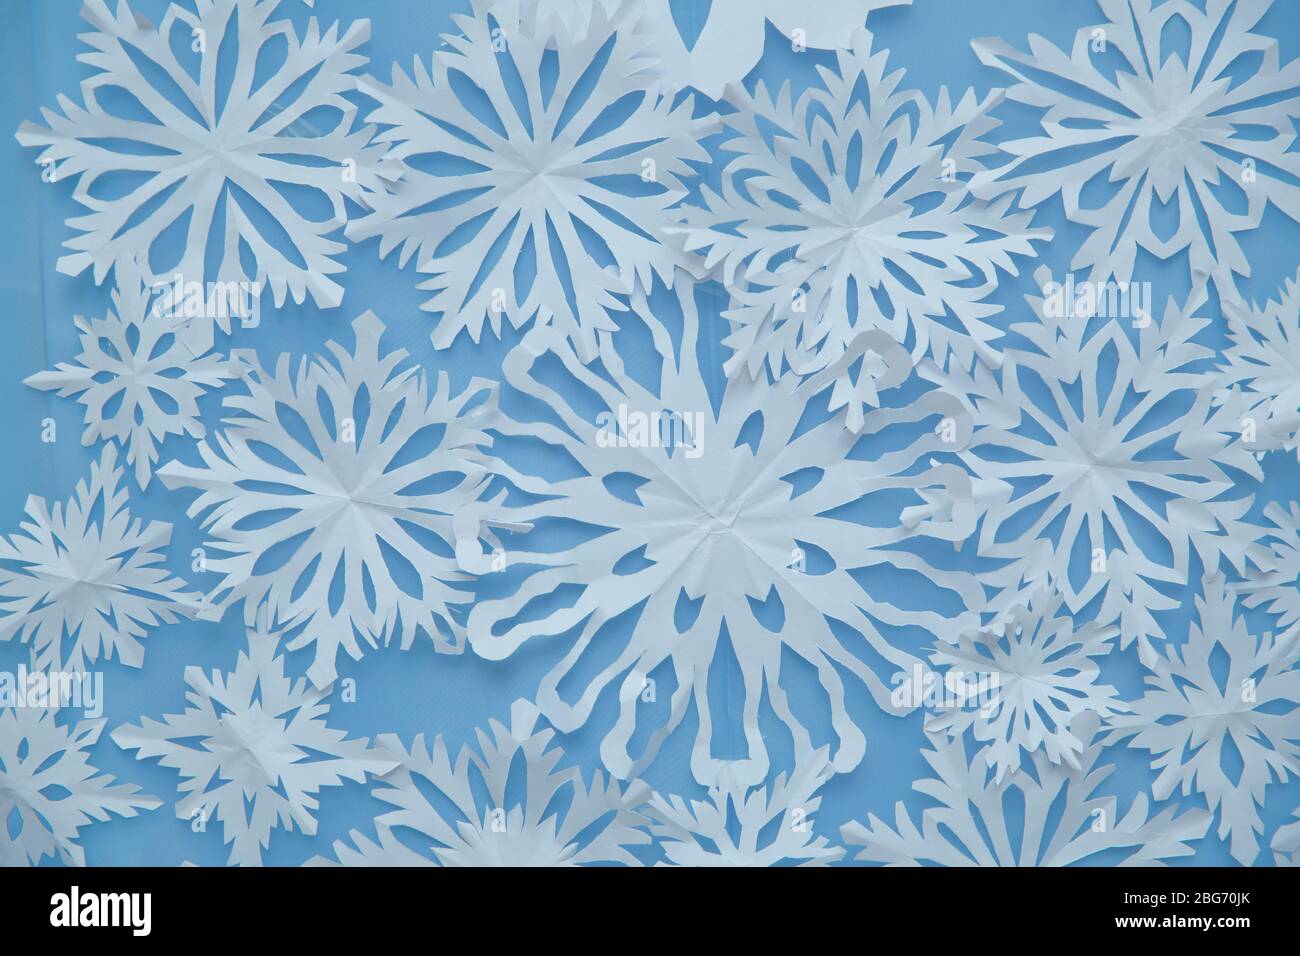 Snowflake Backgrounds Online - www.puzzlewood.net 1695979167